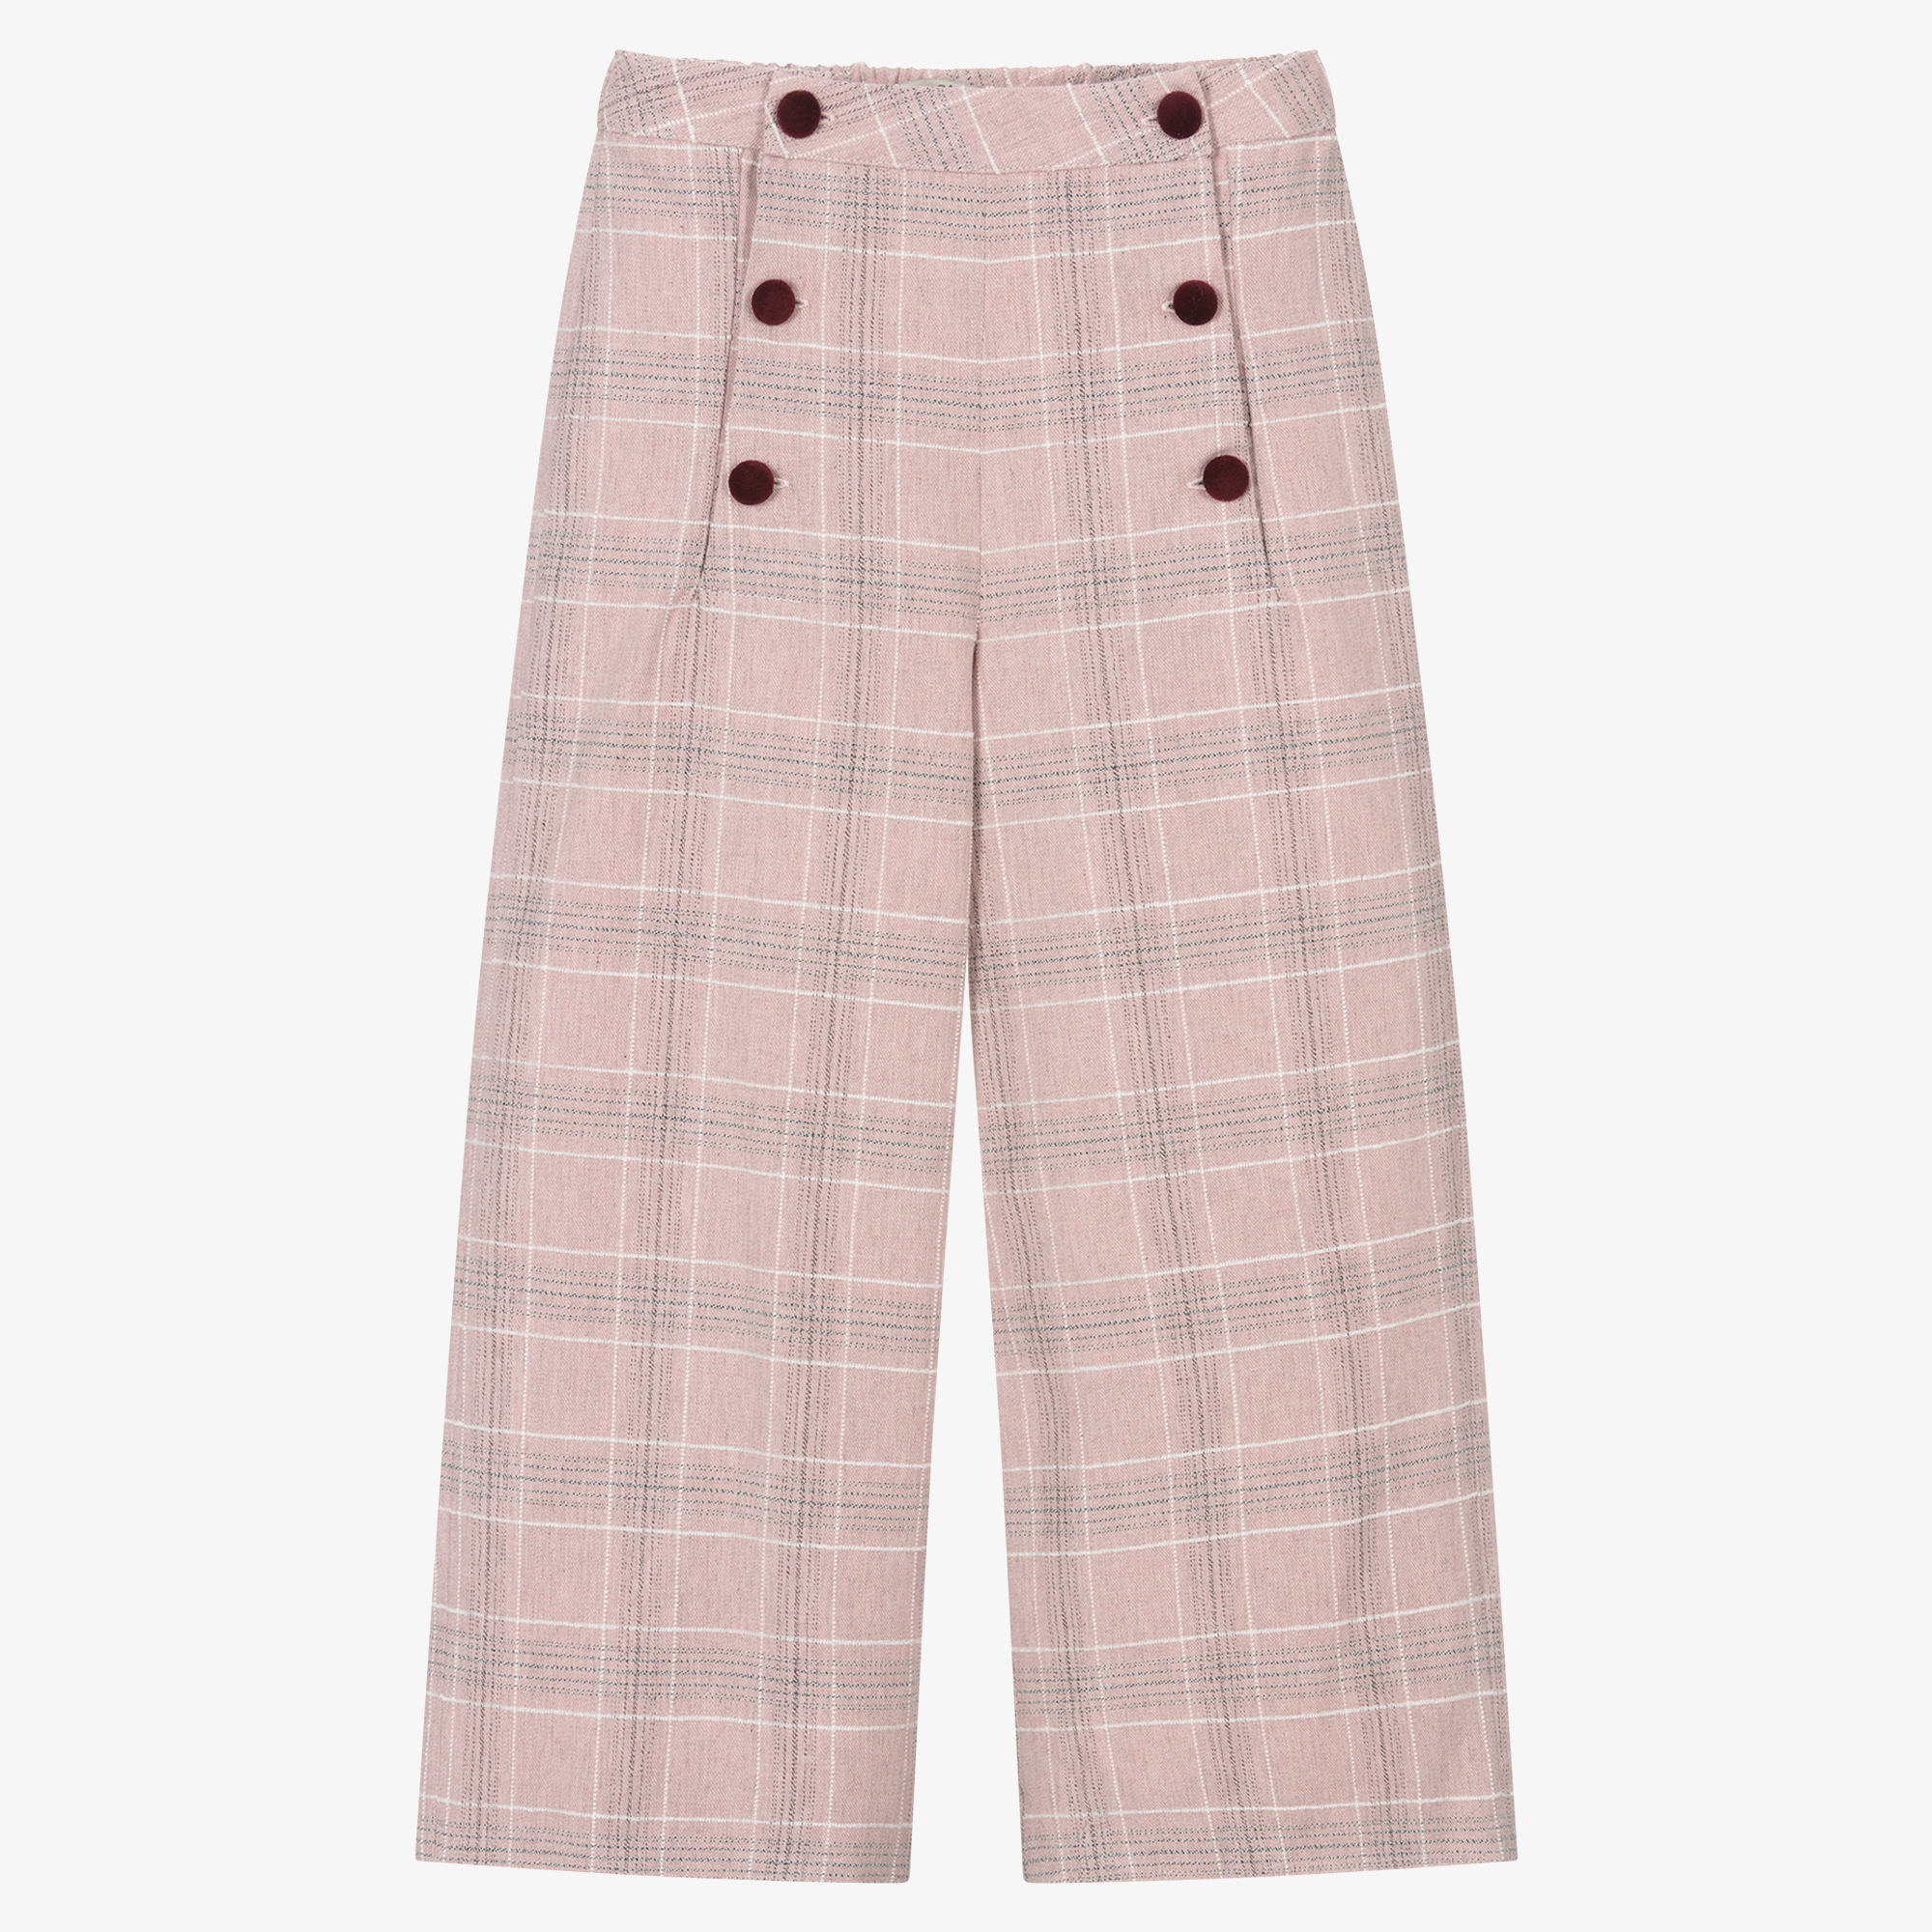 Pink Checked Trousers for Women for sale  eBay